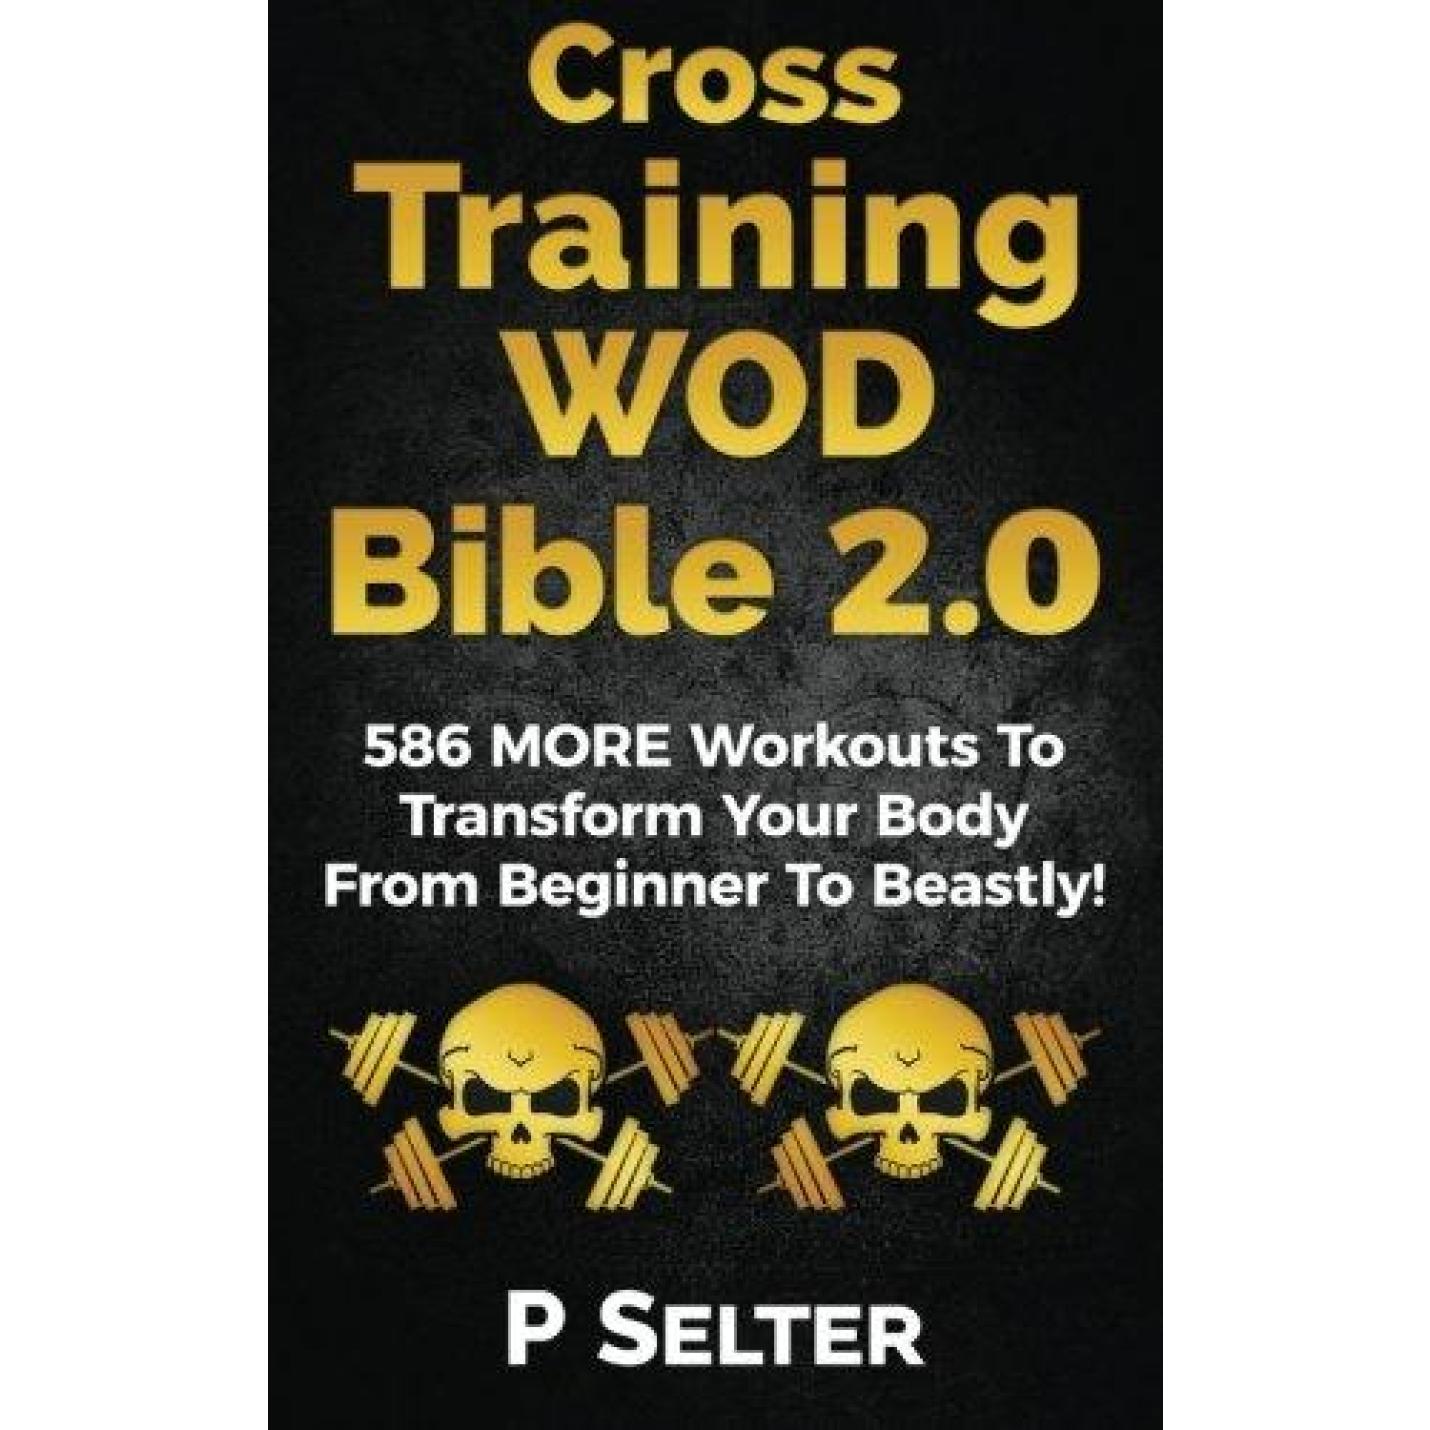 Cross Training WOD Bible 2.0: 586 MORE Workouts To Transform Your Body From Beginner To Beastly! Paperback